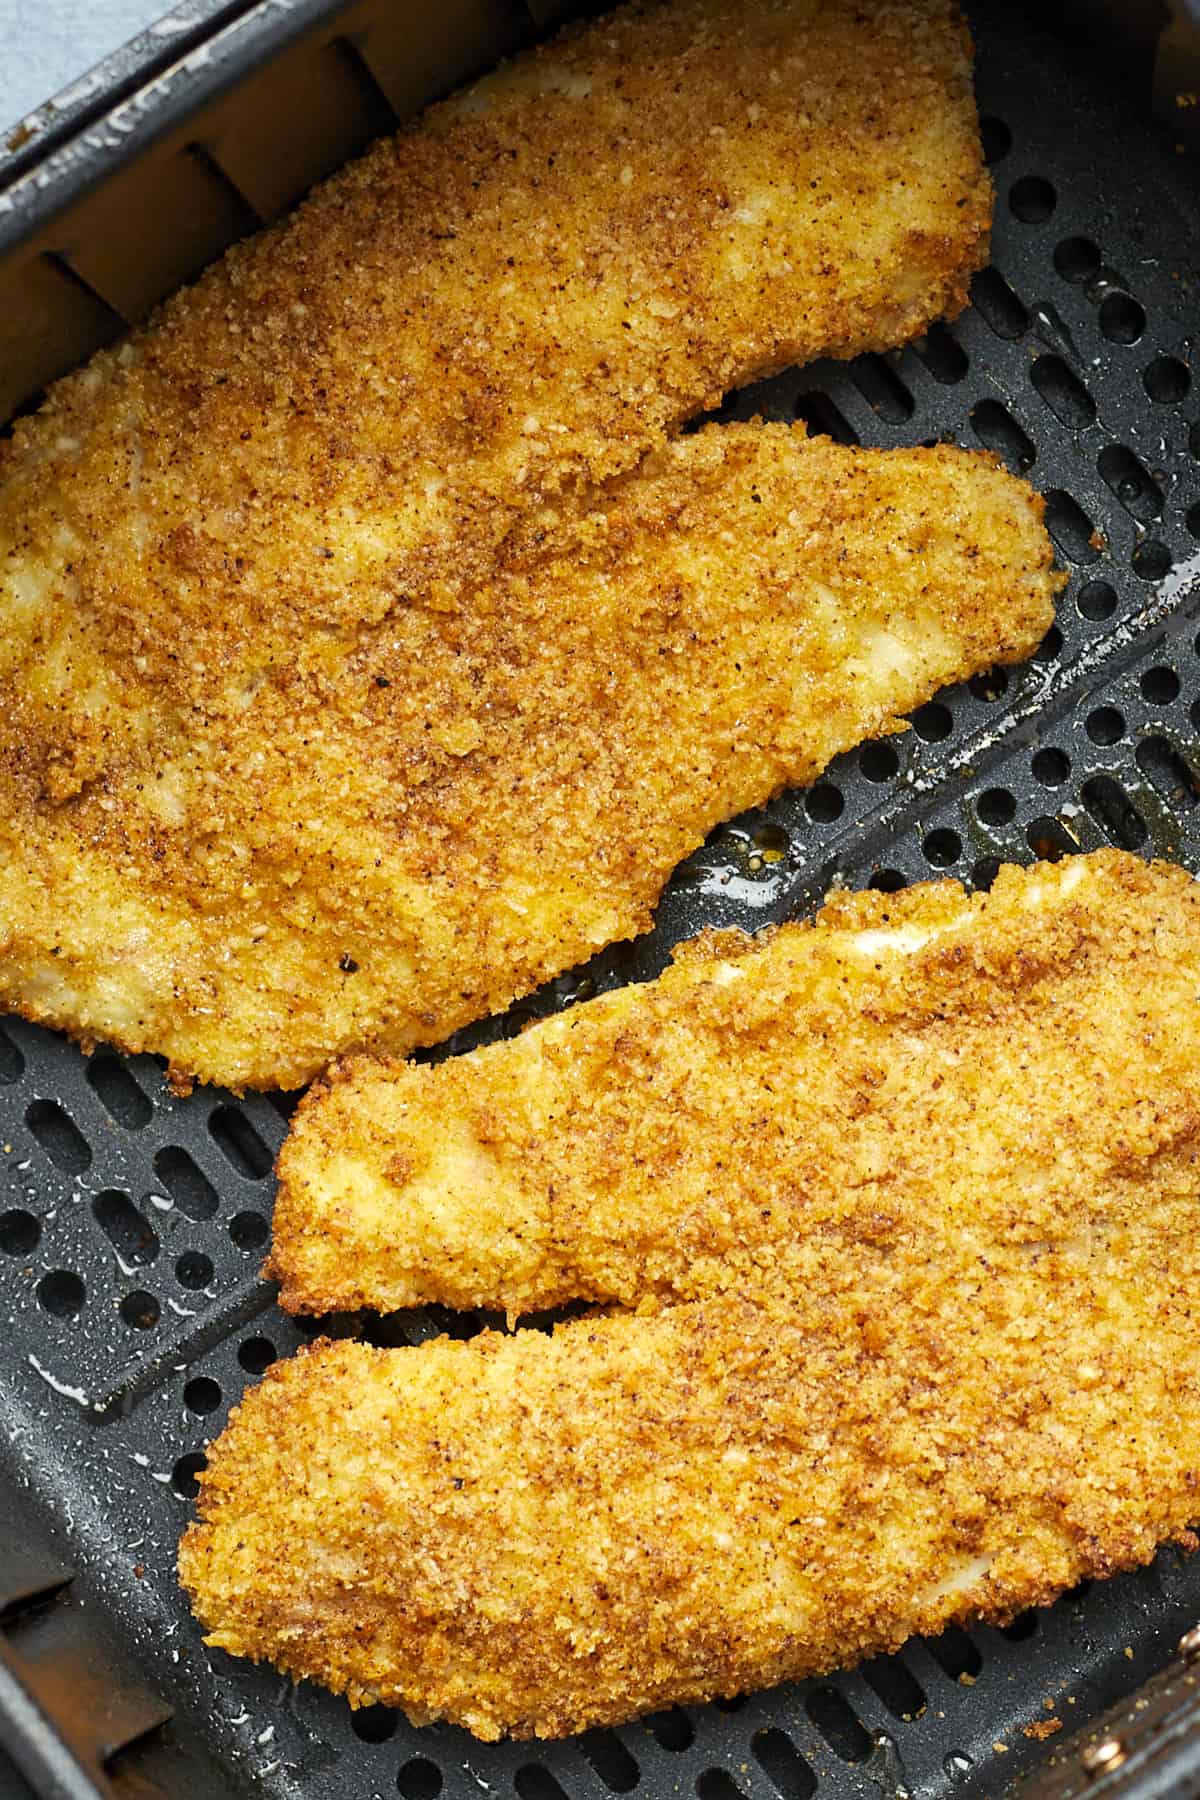 Cooked air fryer tilapia